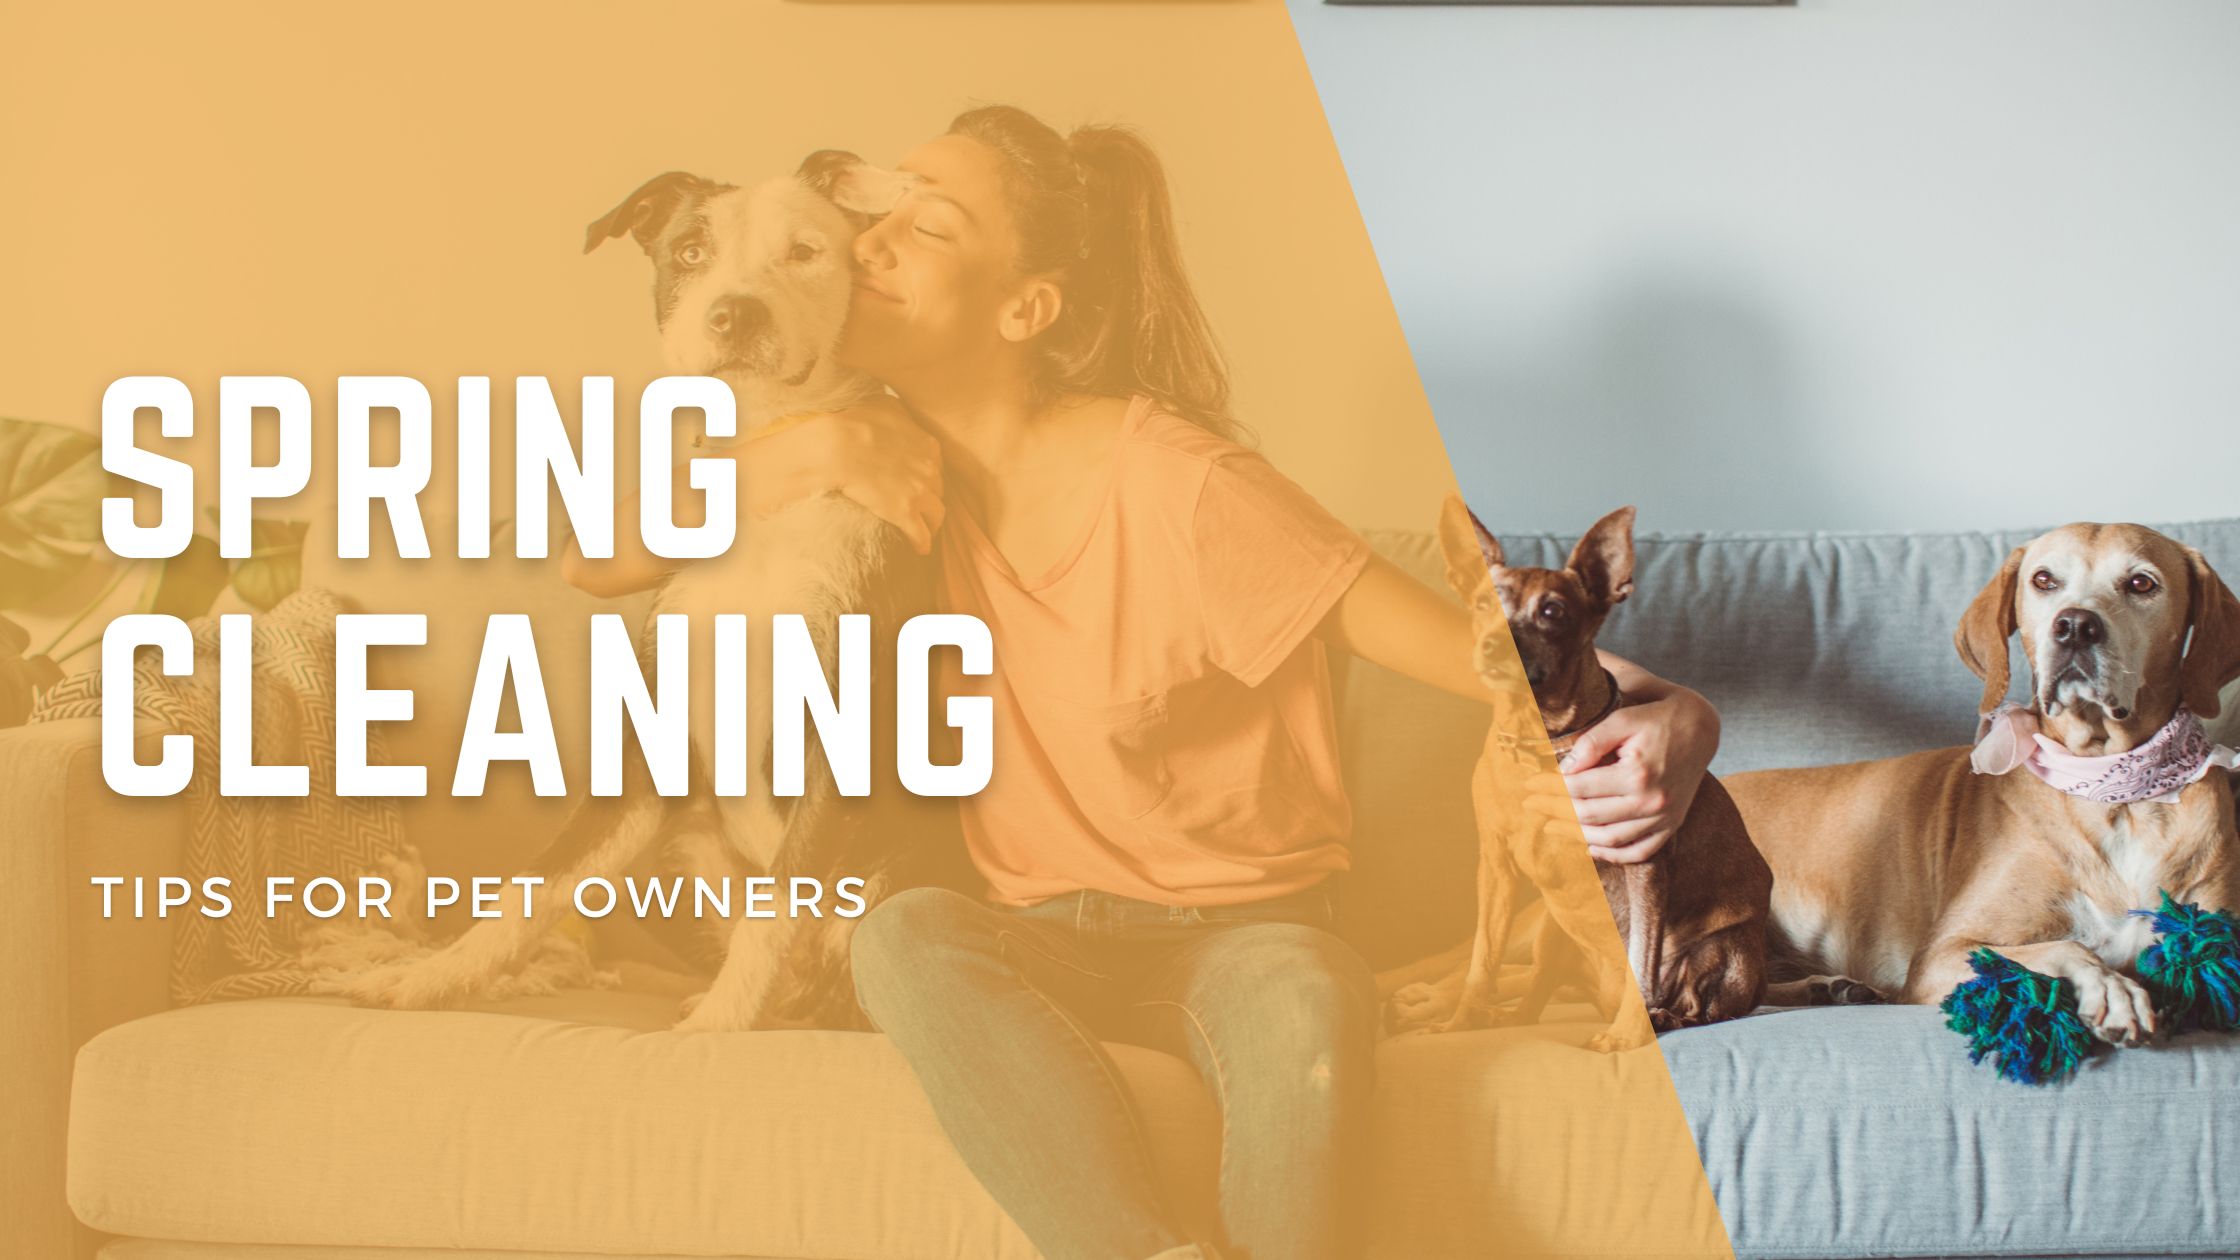 Spring Cleaning Tips for Pet Owners - Keeping A Clean Home